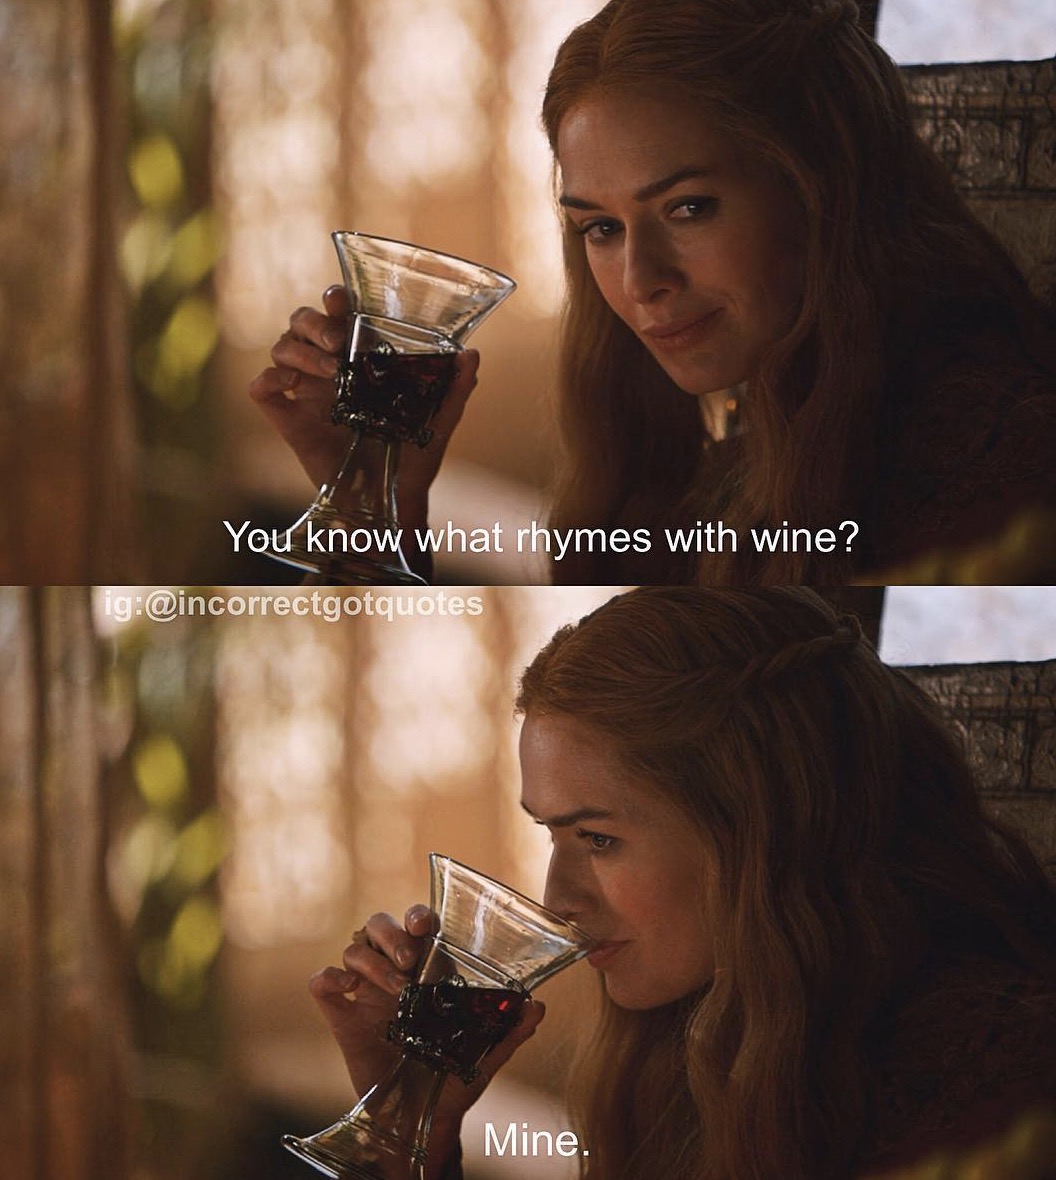 15 Hilariously Wrong Game Of Thrones Quotes